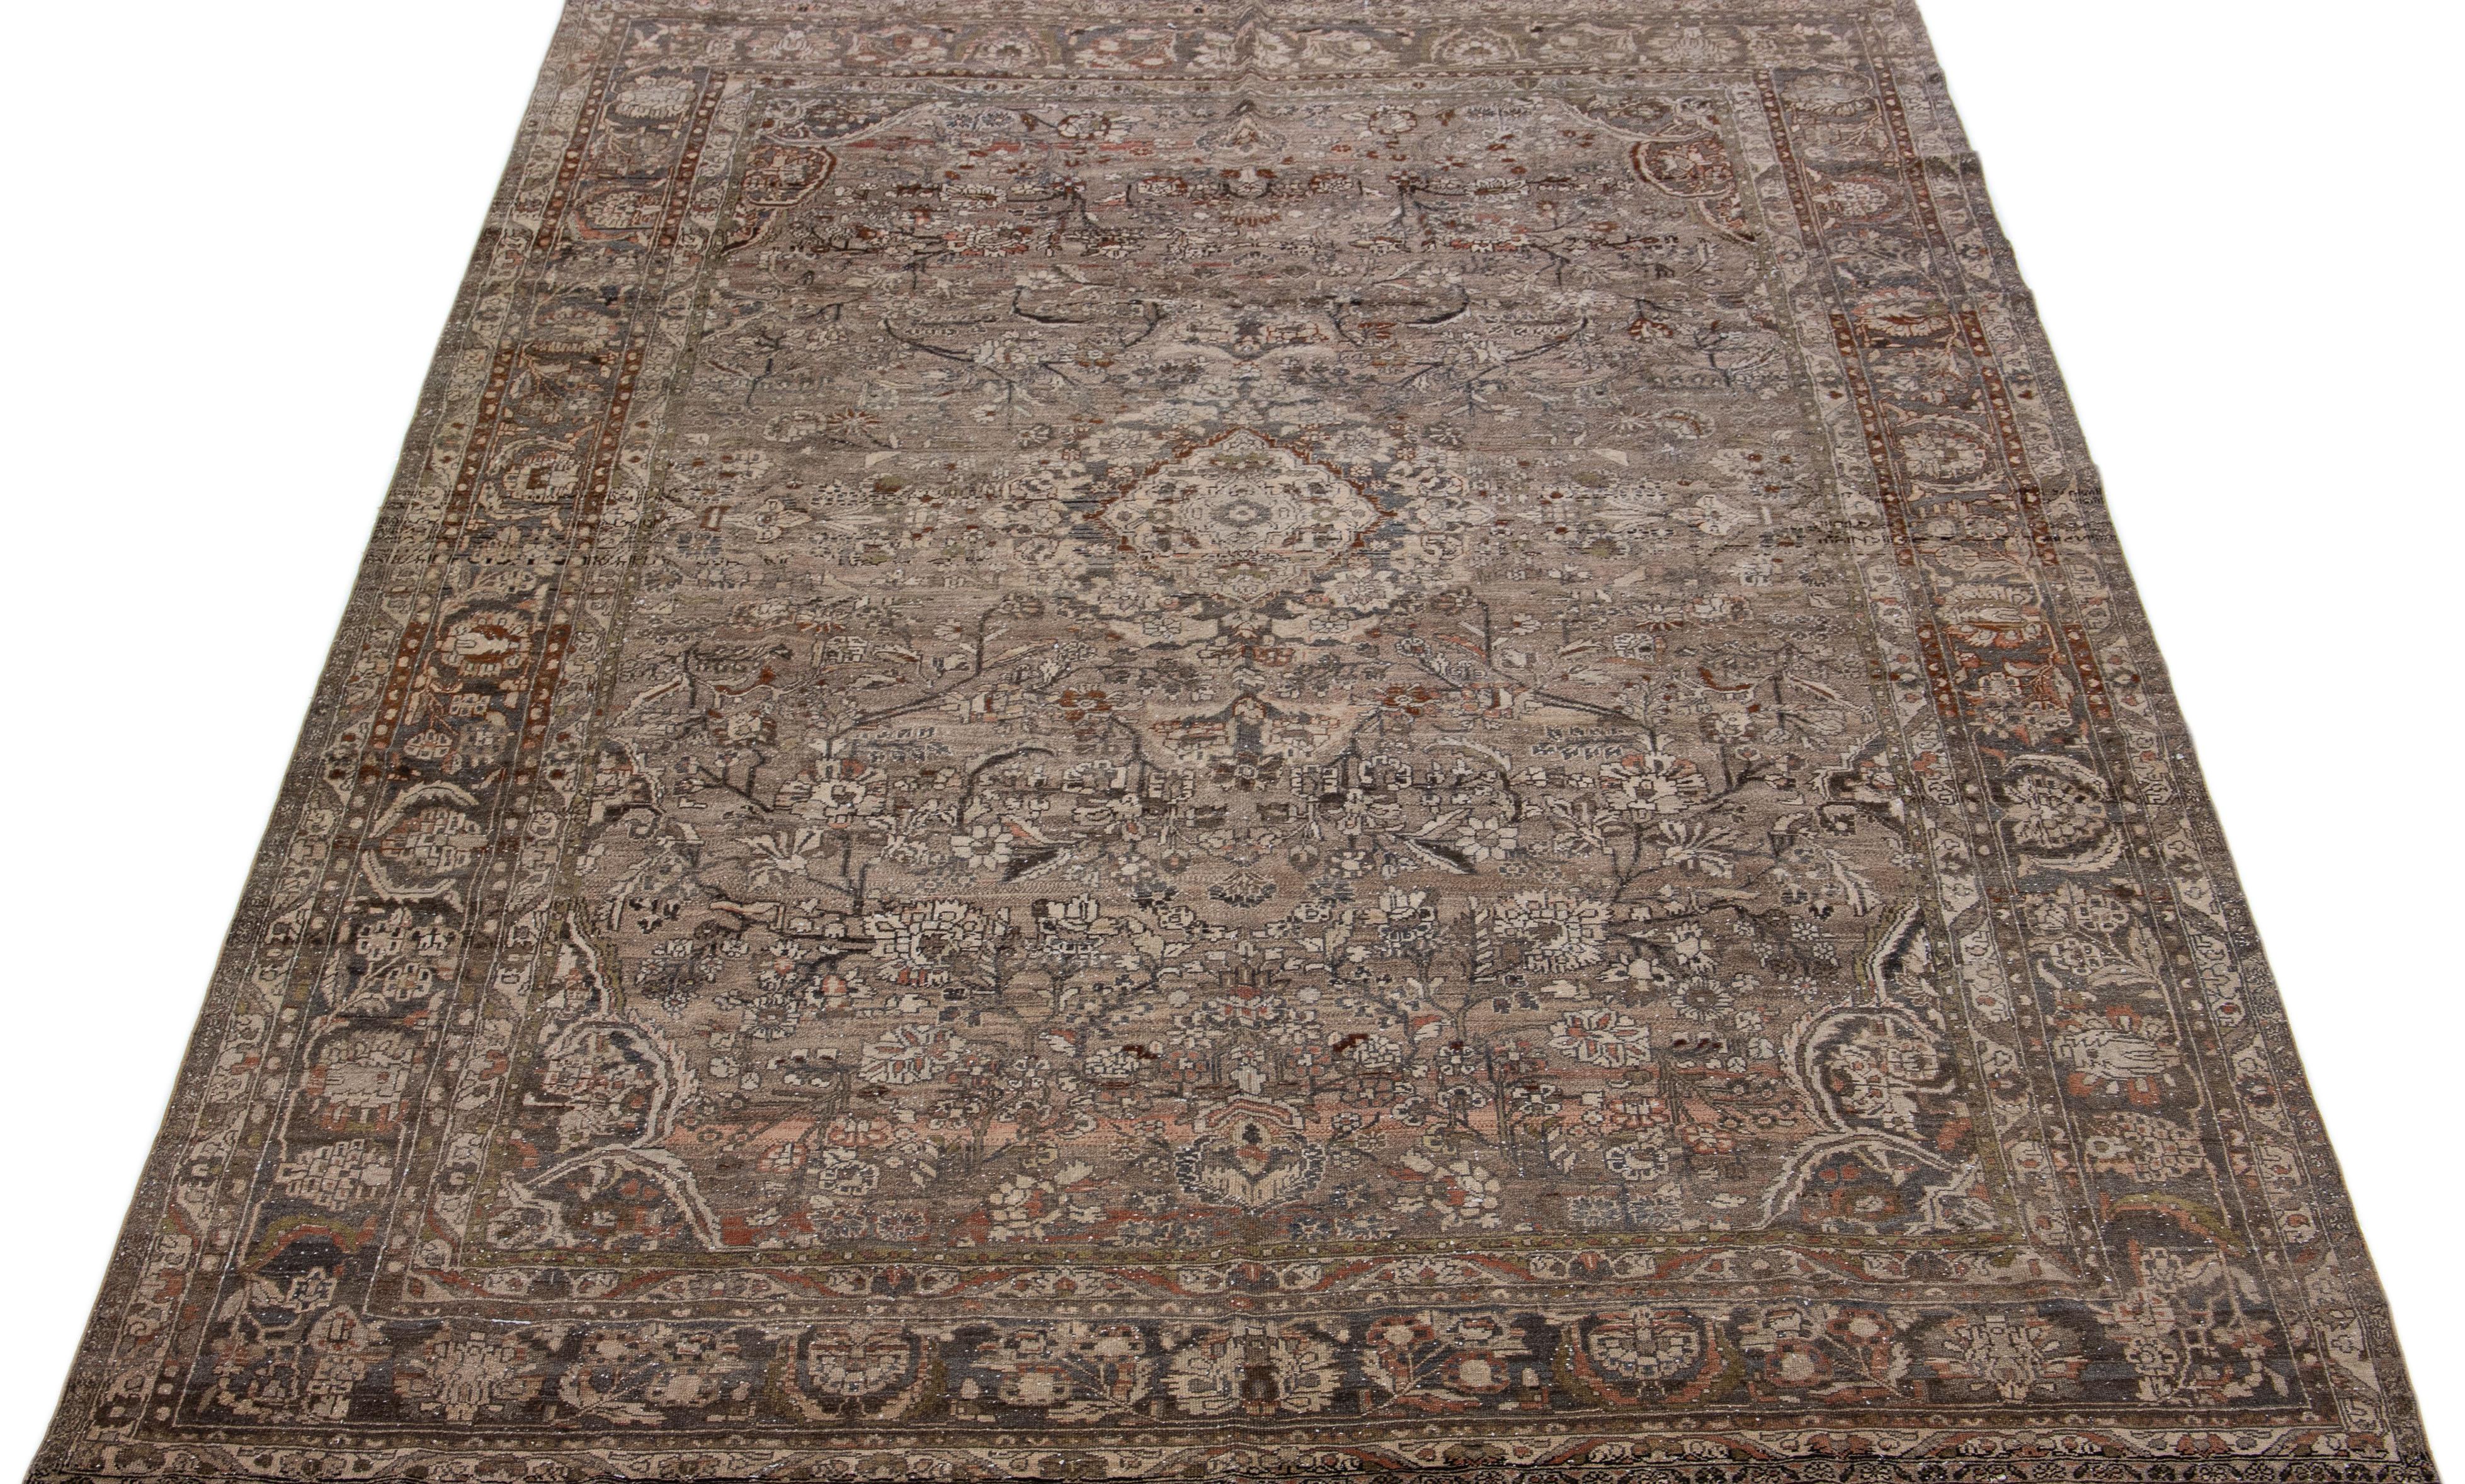 Beautiful hand-knotted antique mahal wool rug with a brown color field. This Persian rug has rust and gray accent colors in an all-over floral design. 

This rug measures: 8'9